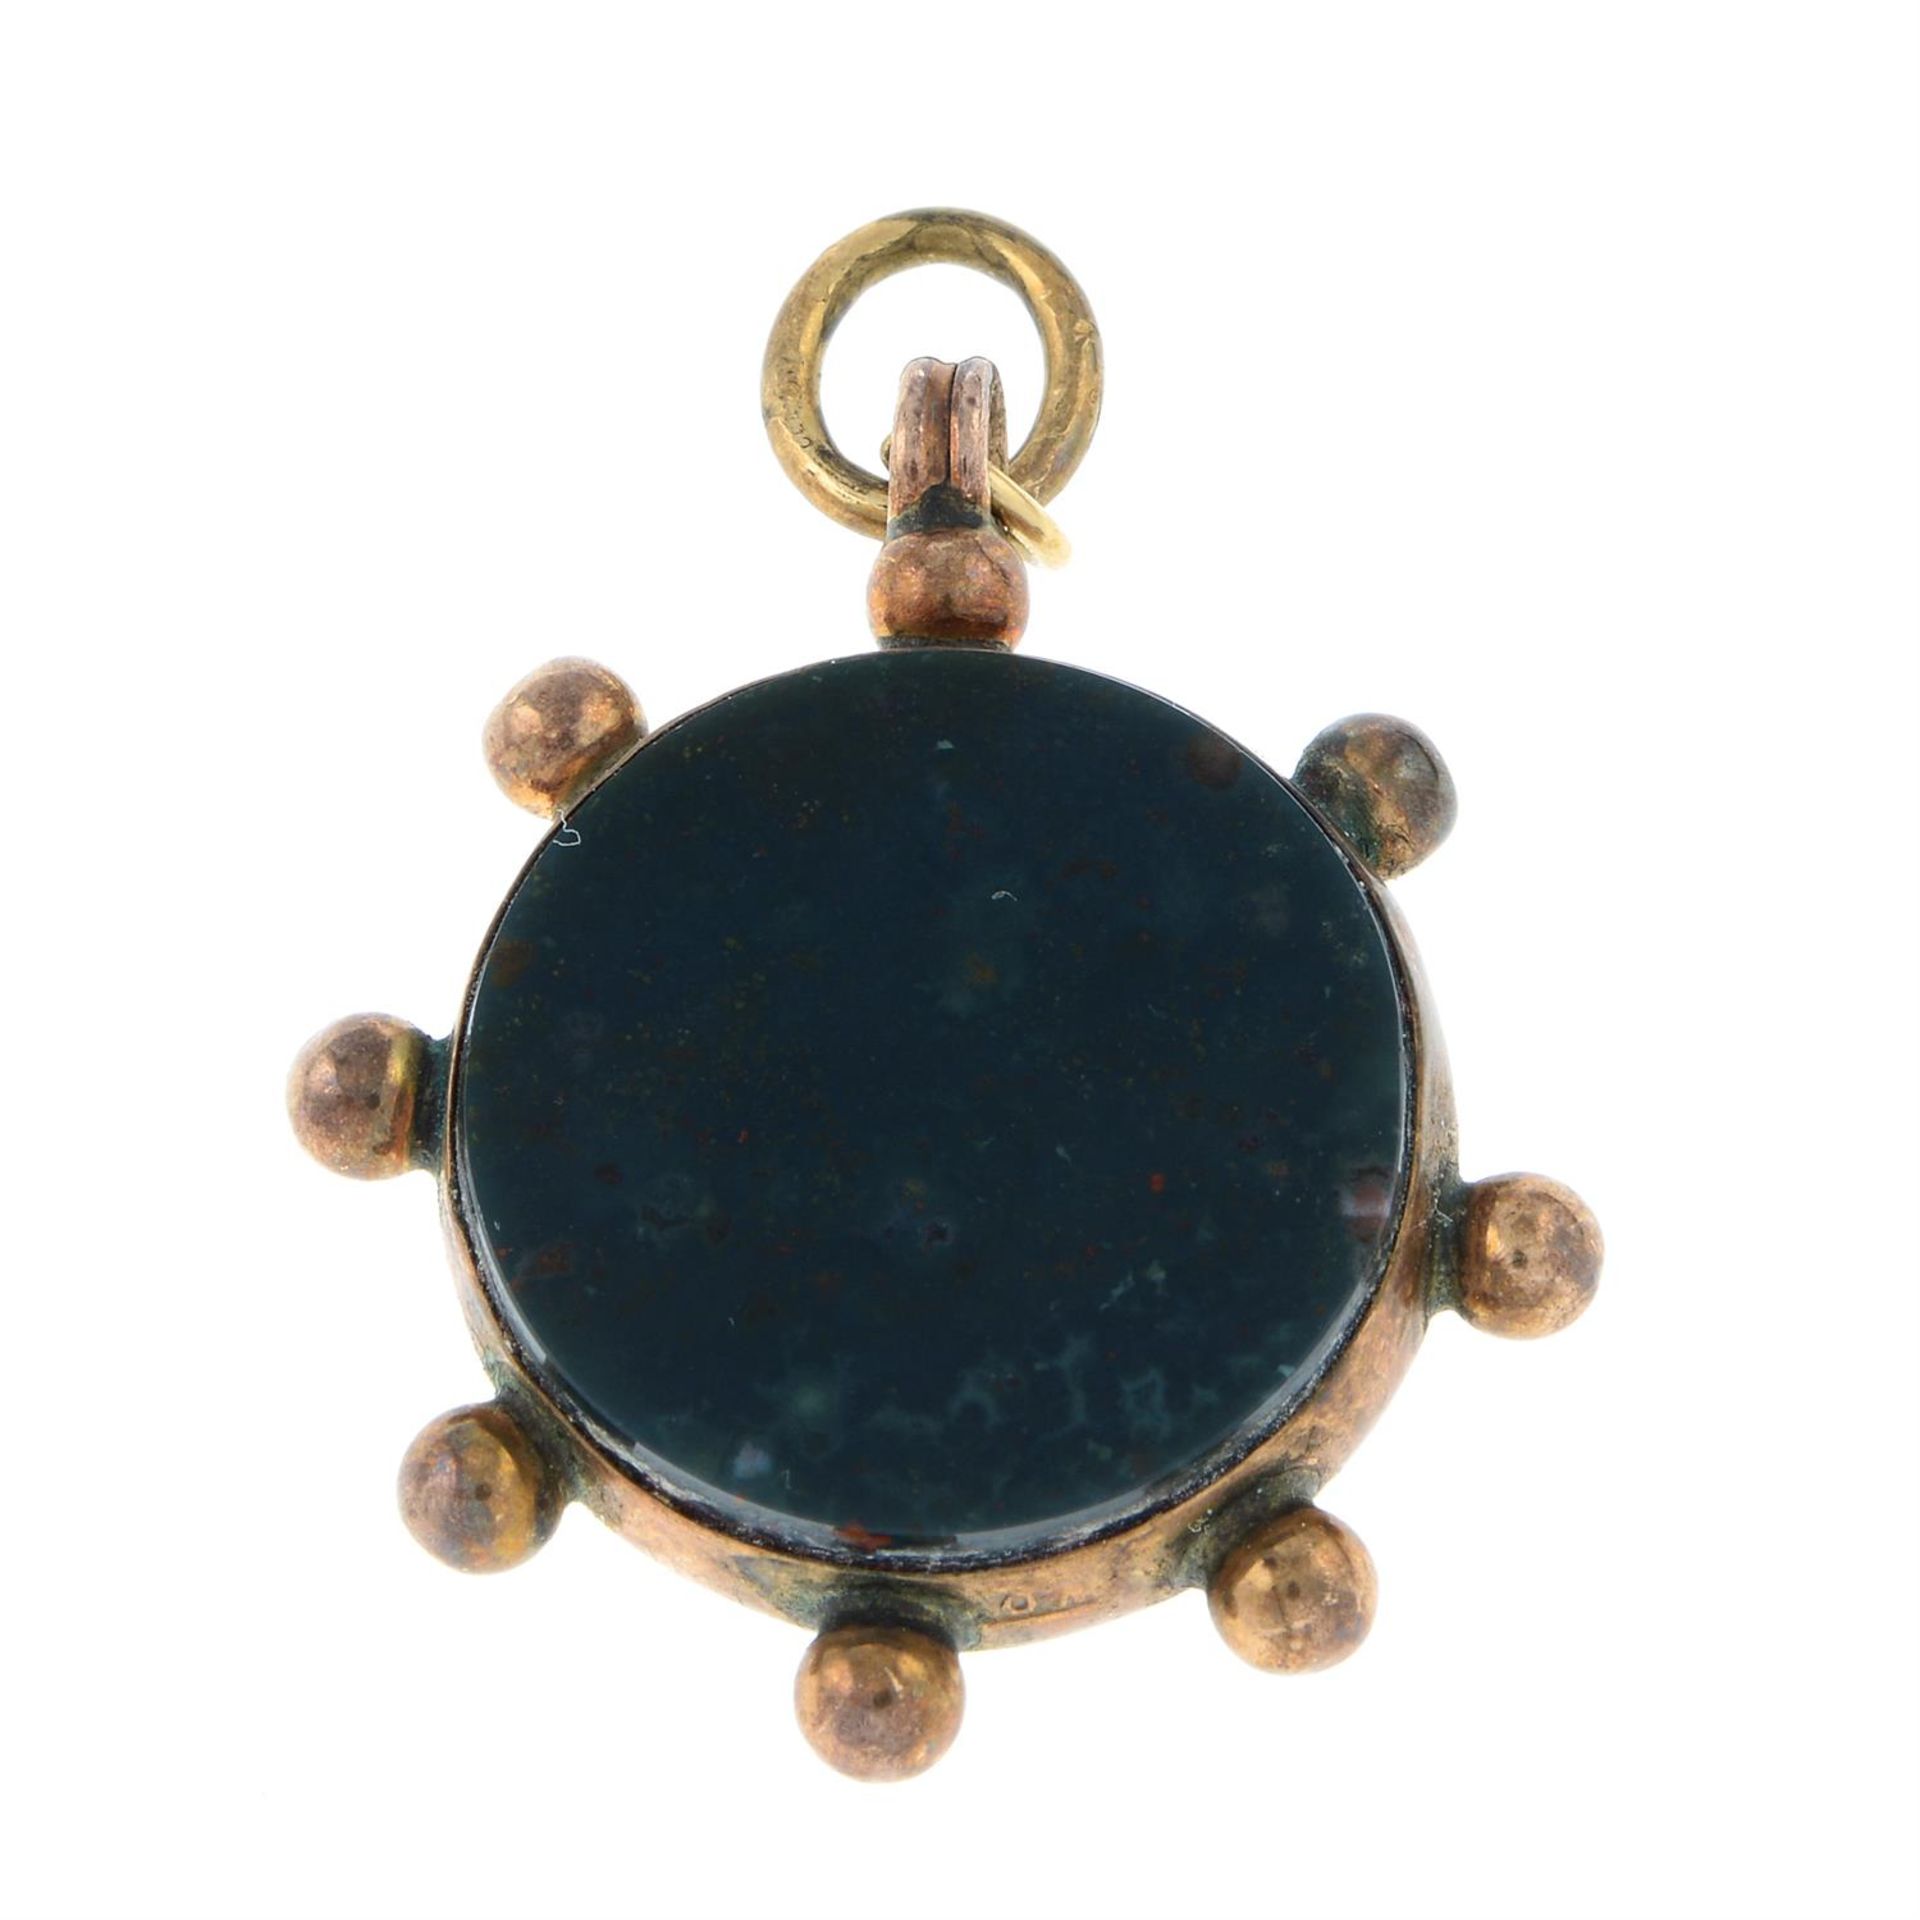 An early to mid 20th century gold bloodstone compass pendant/charm. - Image 2 of 2